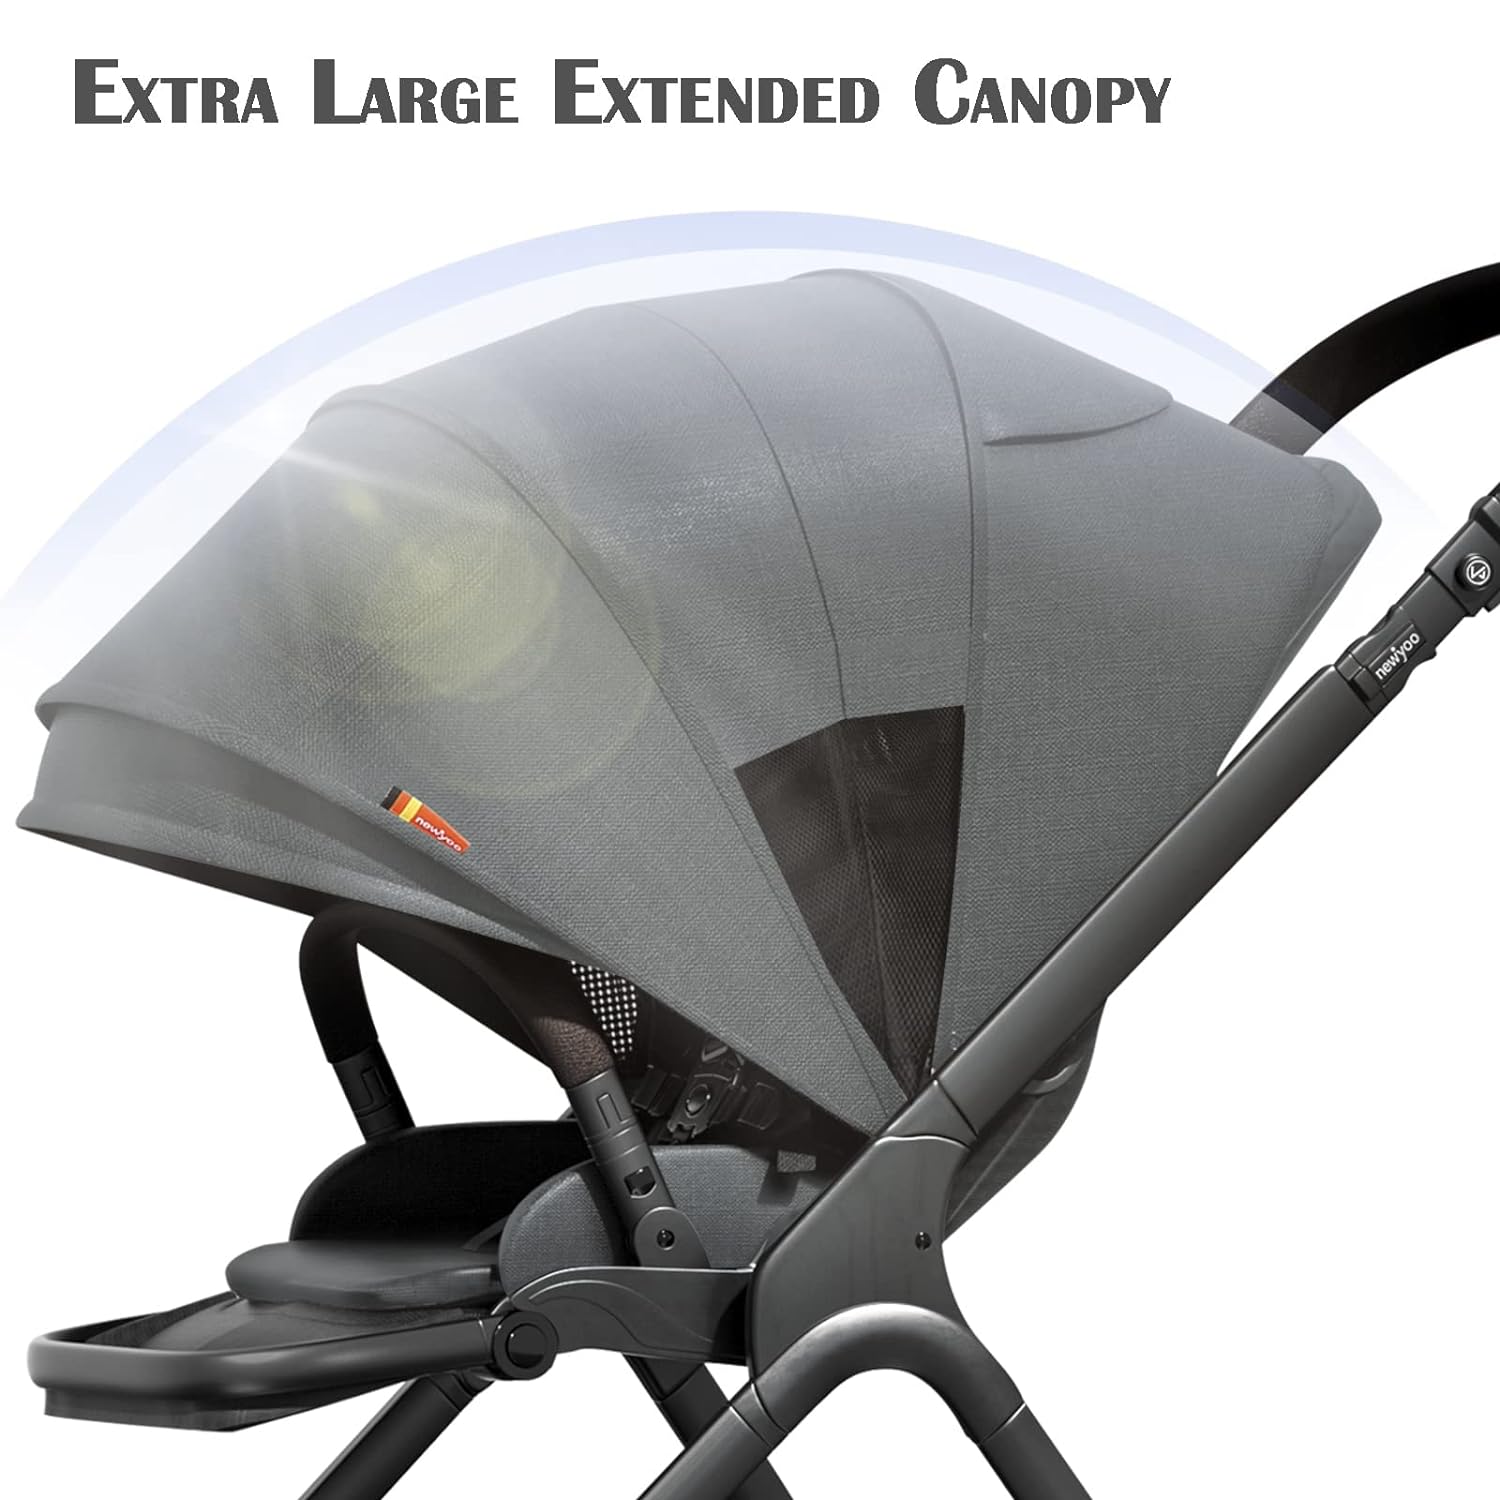 newyoo Baby Stroller, Baby Reversible Stroller, Standard Stroller, Parent or Forward Facing, One-Hand Recline, Compact Fold, Extendable Canopy, Cushion, Mosquito Net, Wrist Strap(Include) Black - Newyoo Baby Stroller Review